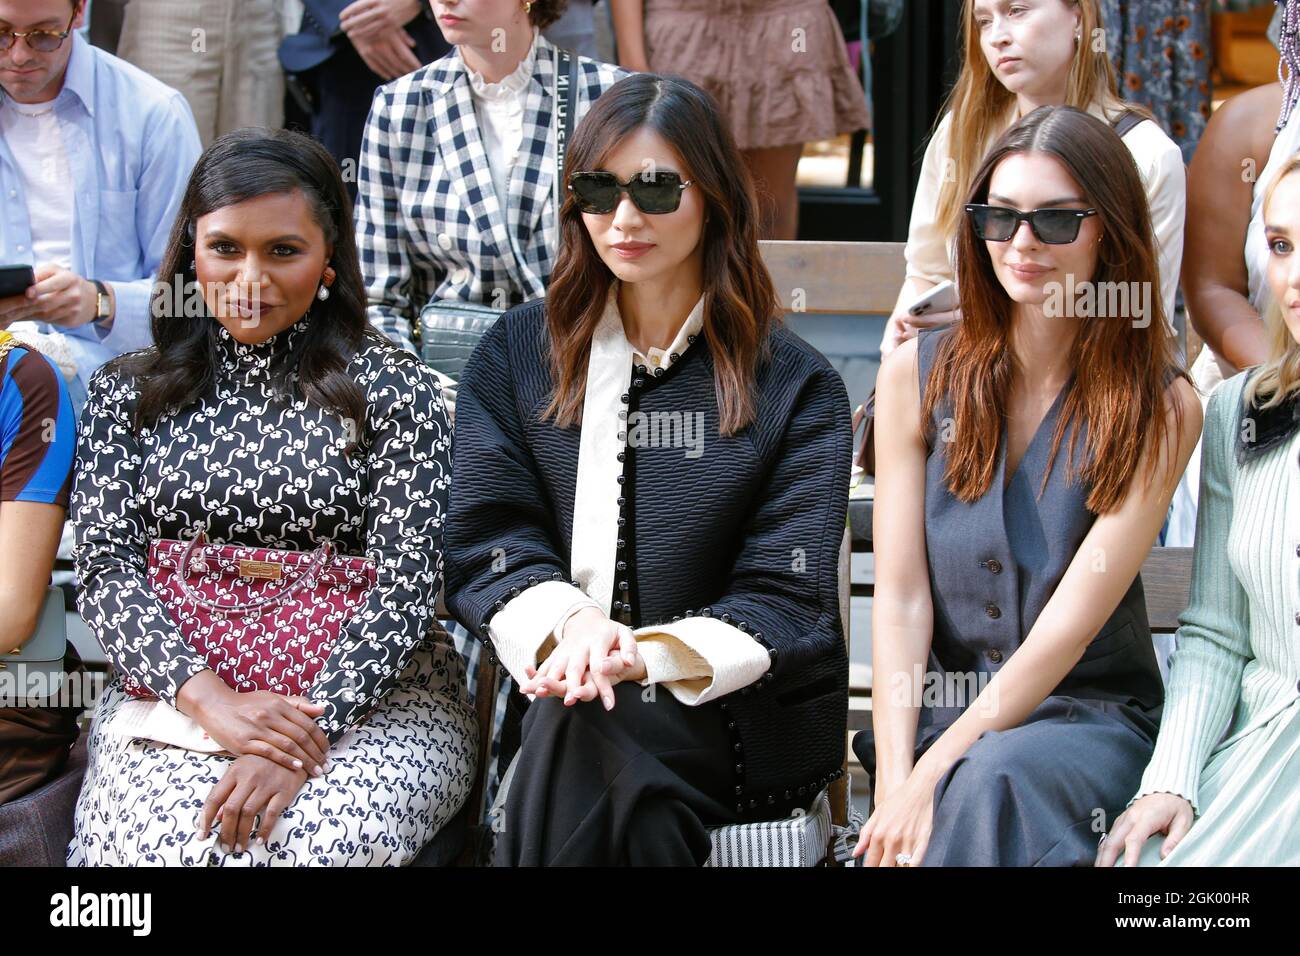 Mindy Kaling, Gemma Chan and Emily Ratajkowski sit in the front